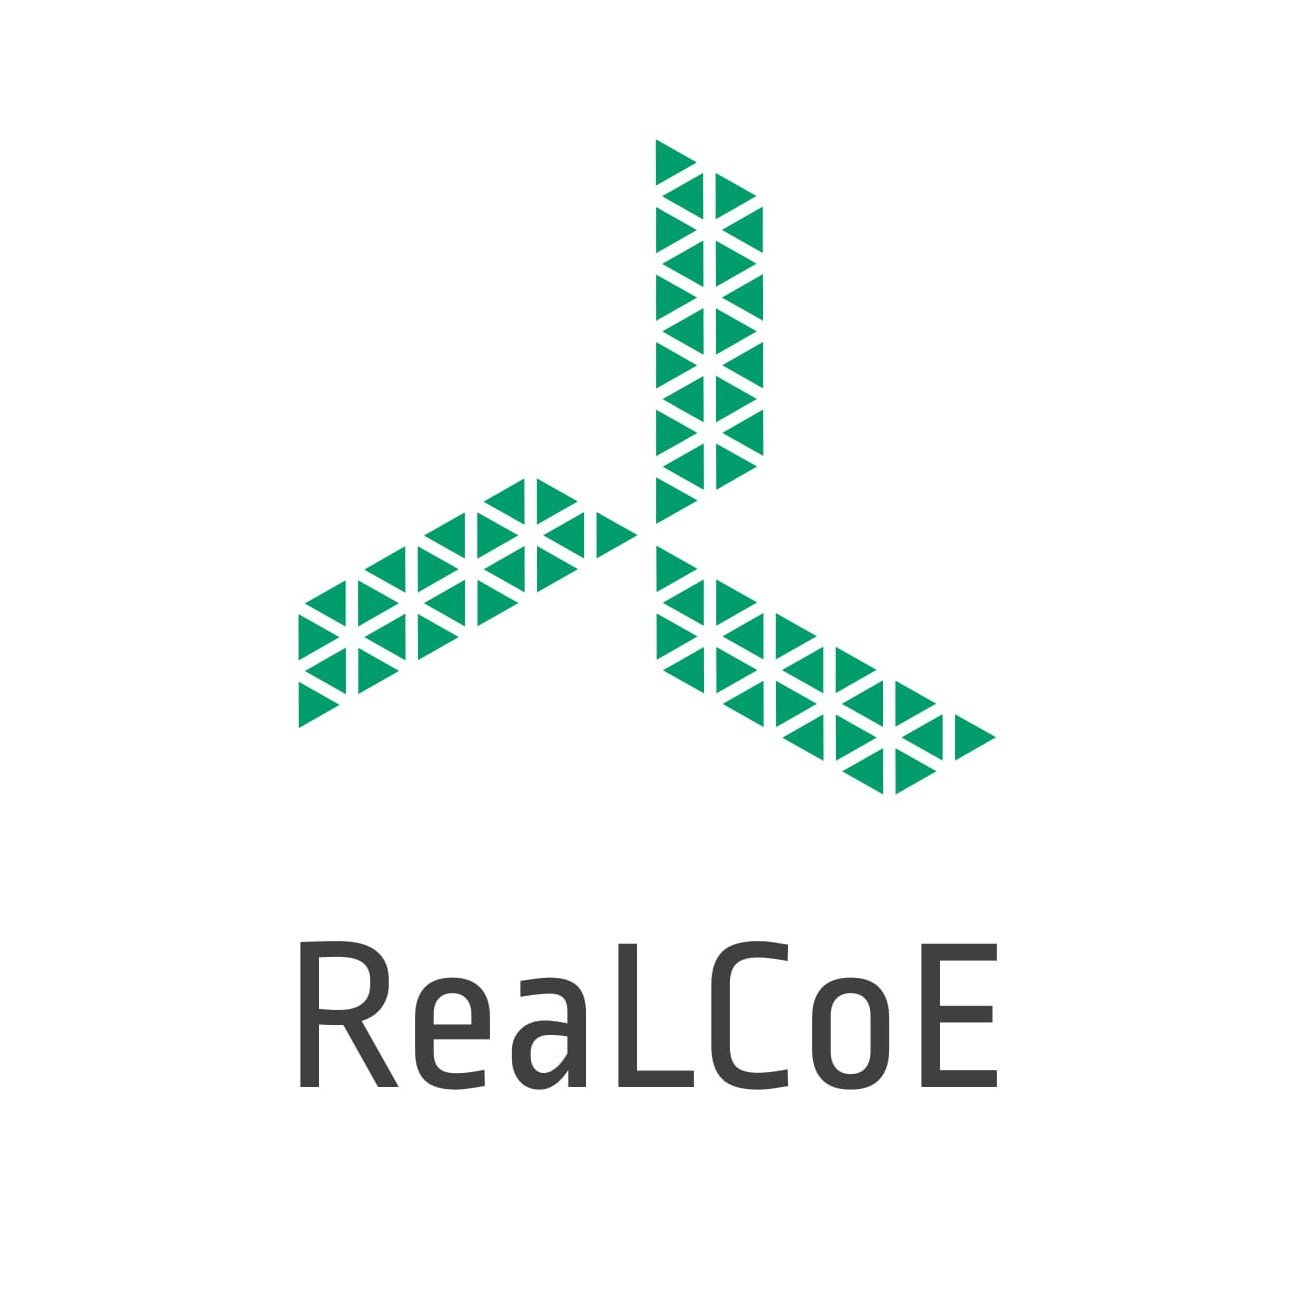 ReaLCoE is an international project developing Offshore Wind Energy Converters of a next generation (10+MW). It is funded by #H2020 @EU_H2020.